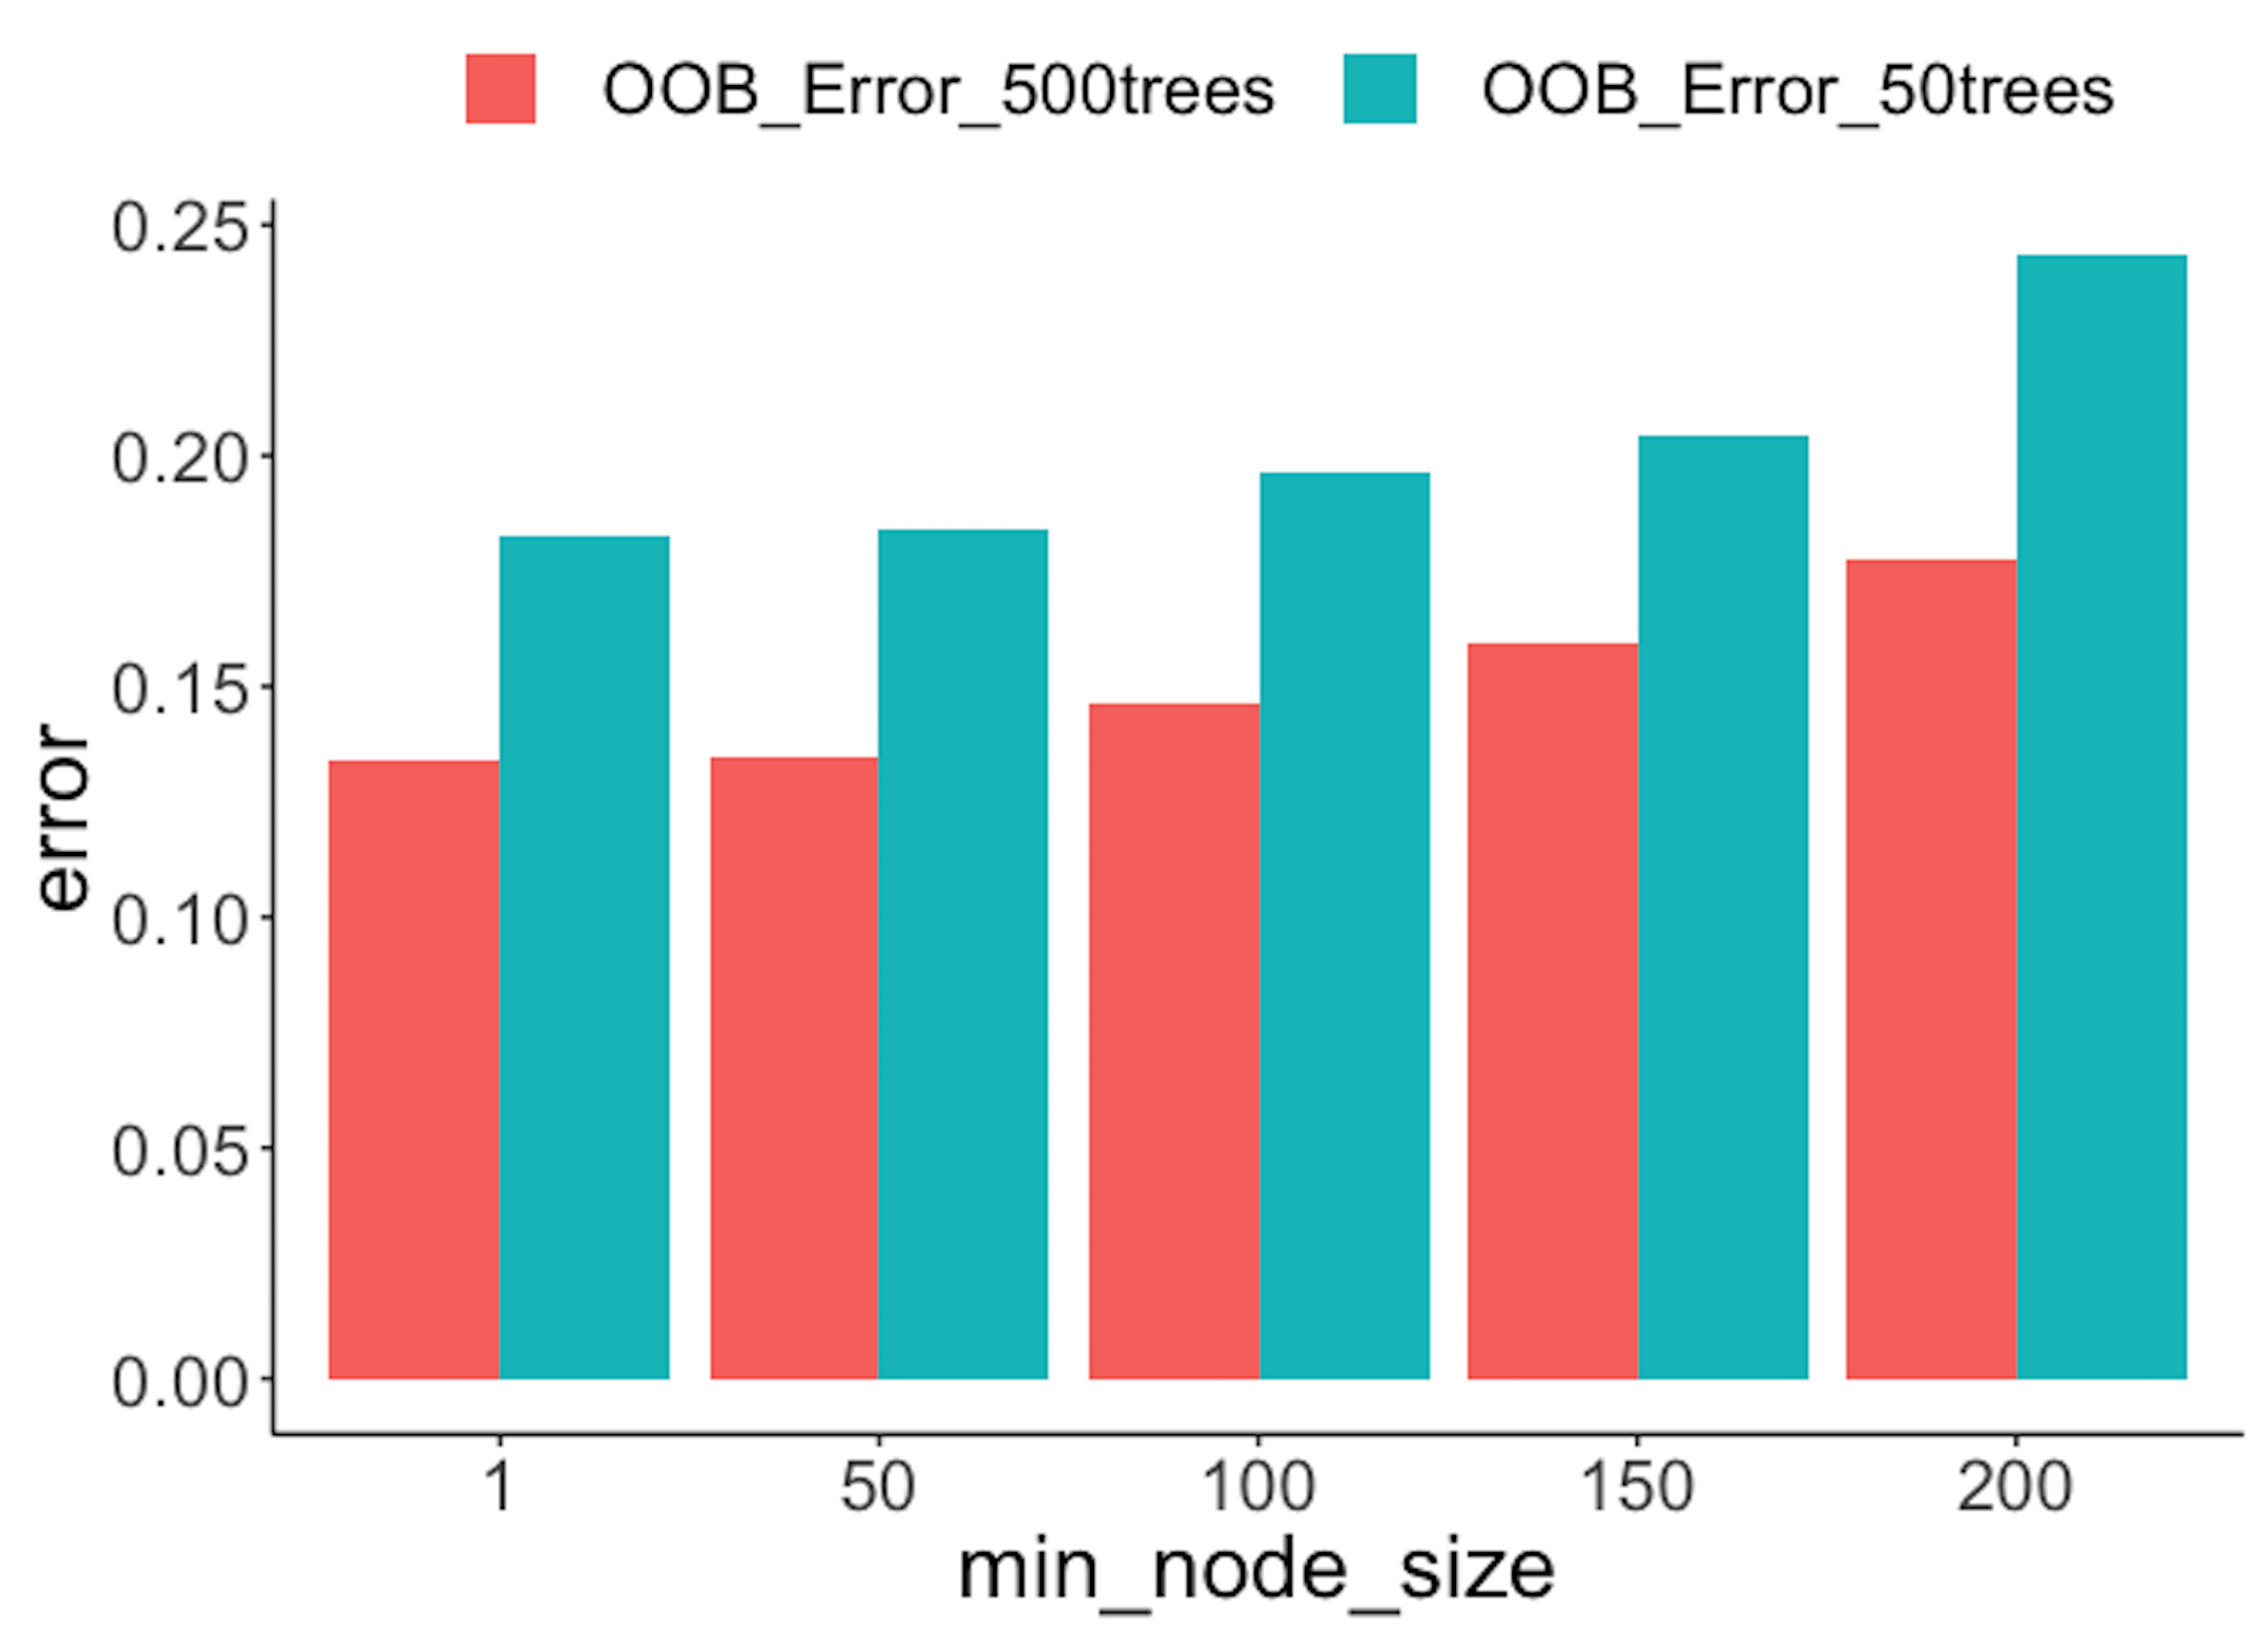 OOB error rates from random forests with a different number of trees